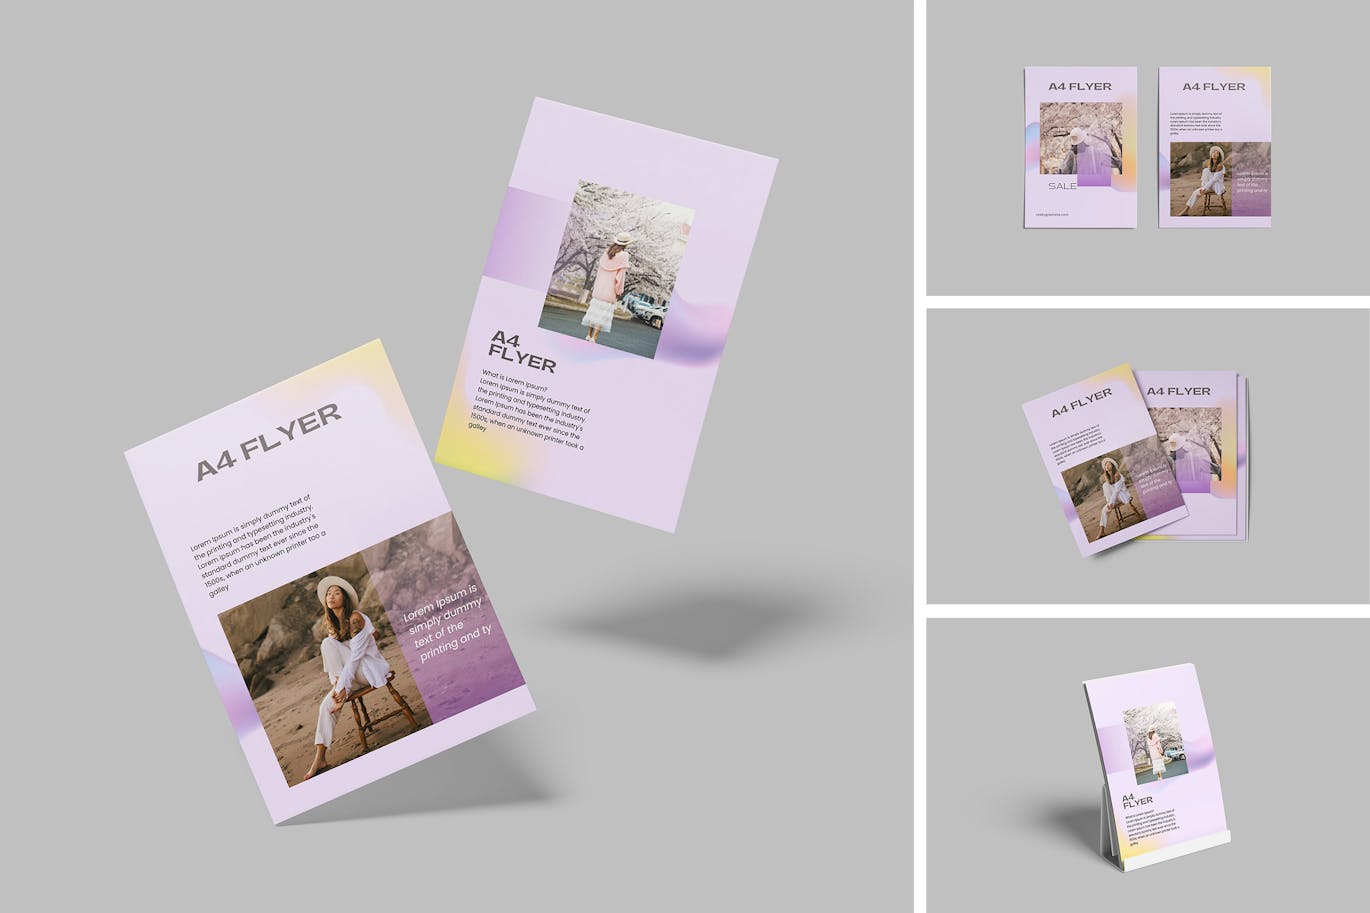 A4 Flyer Mockup Collections-3.jpg